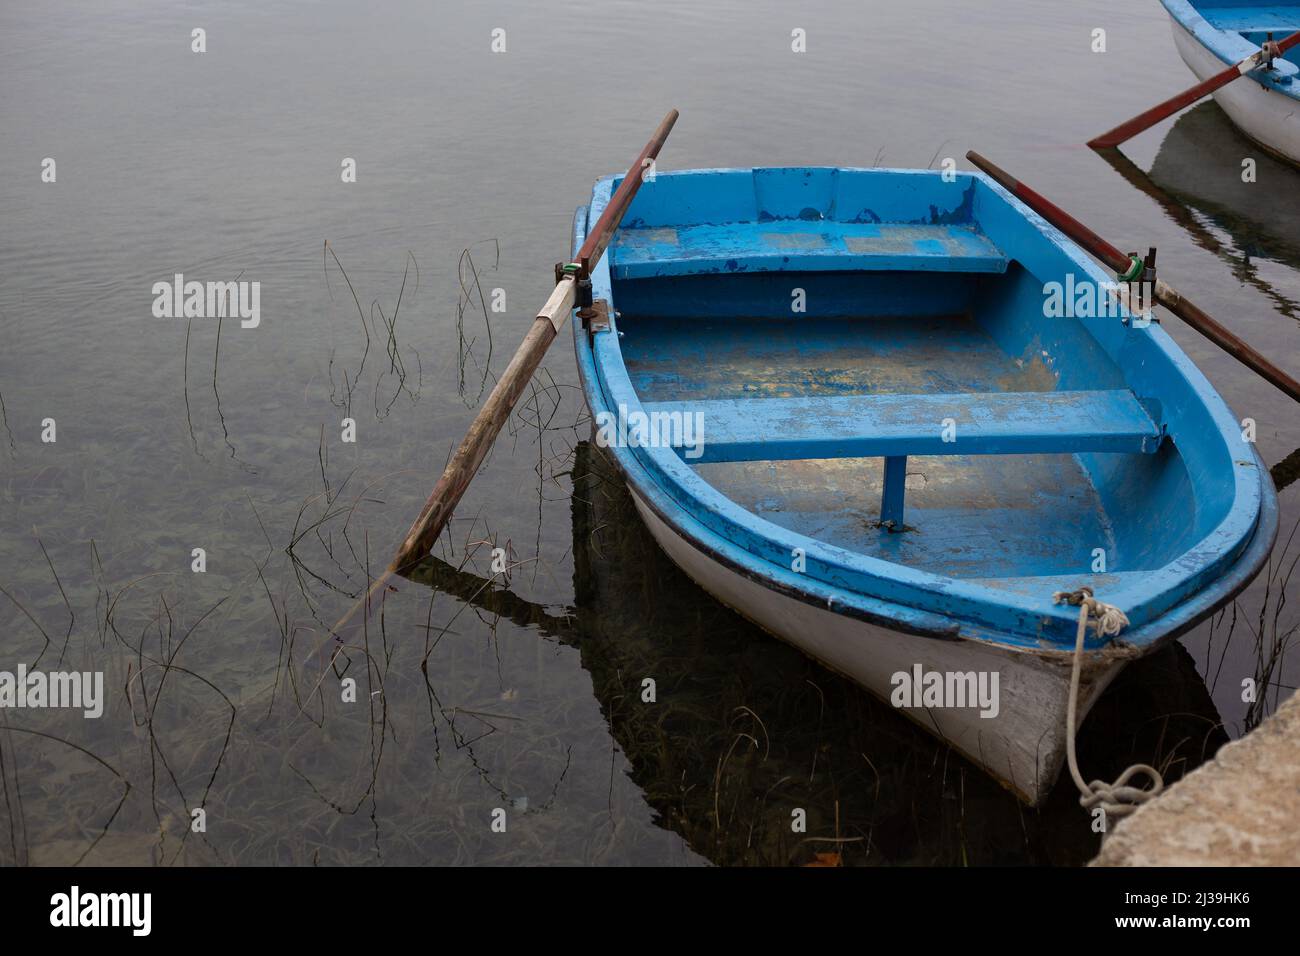 Old blue wooden boat moored at the edge of a lake Stock Photo